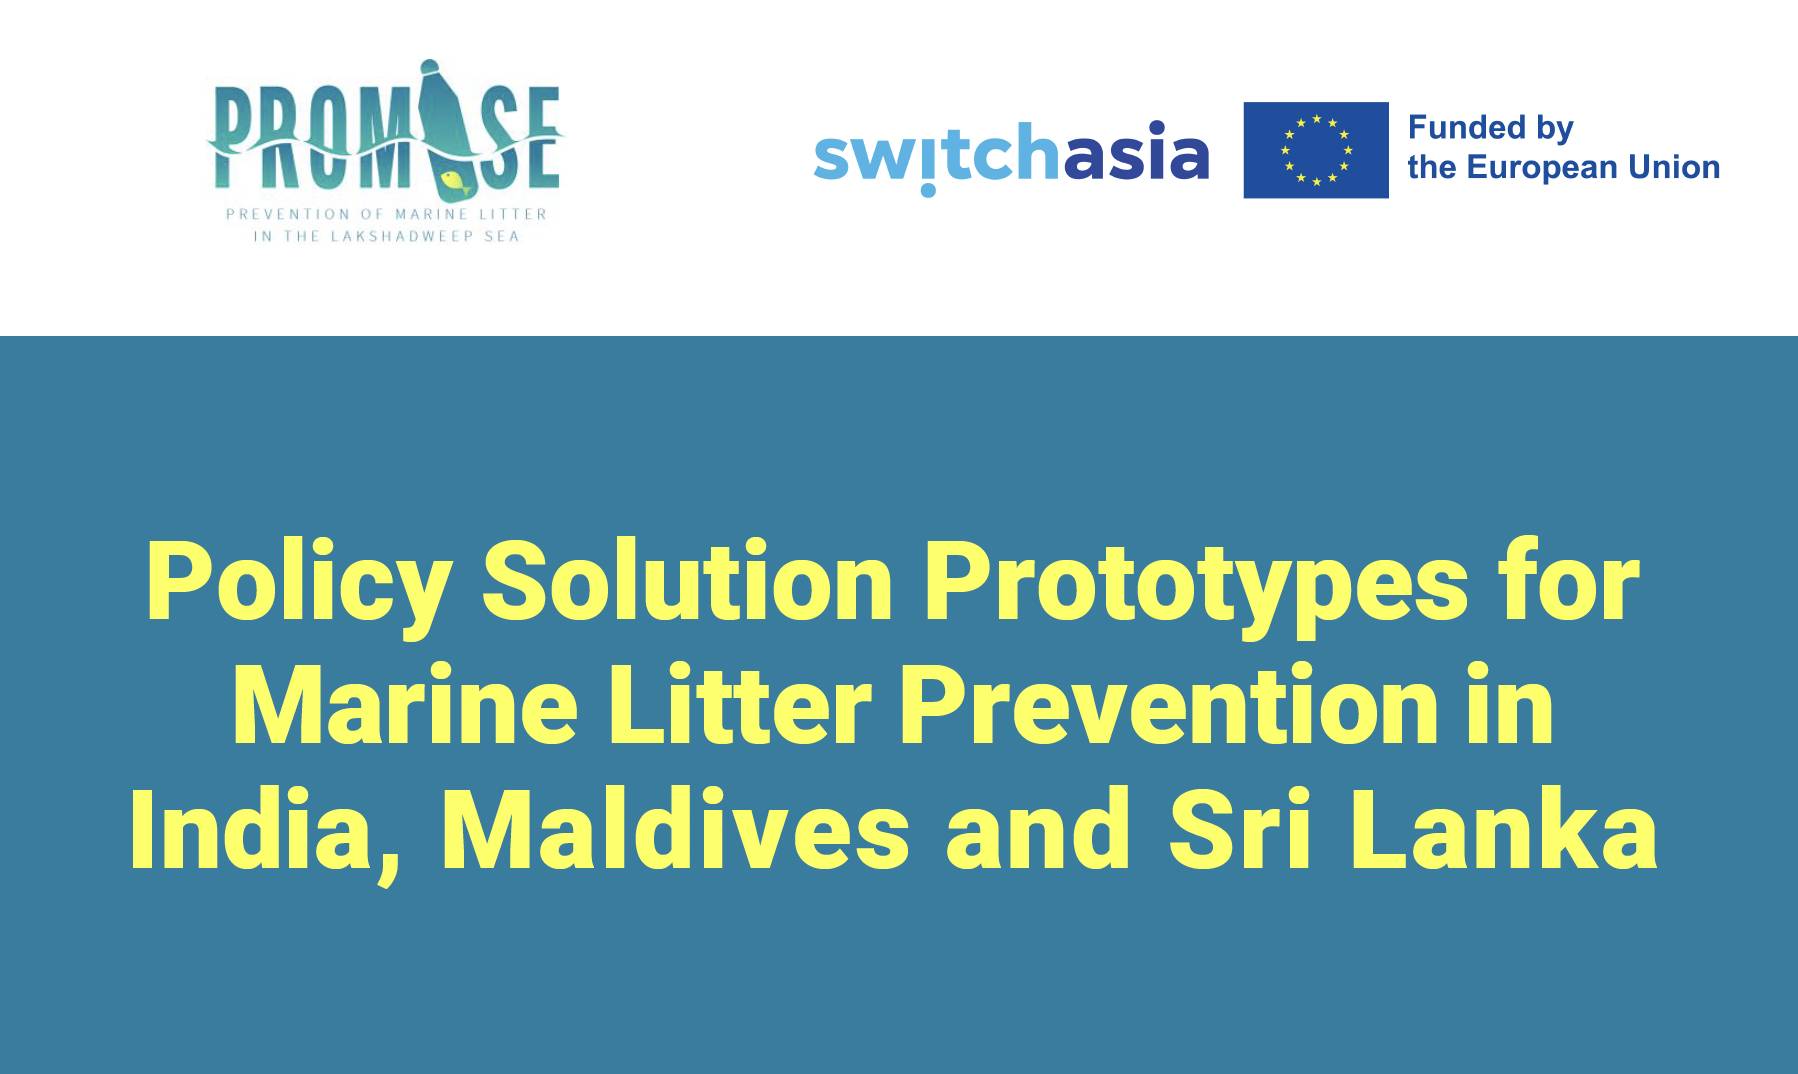 Policy Solution Prototypes for Marine Litter Prevention